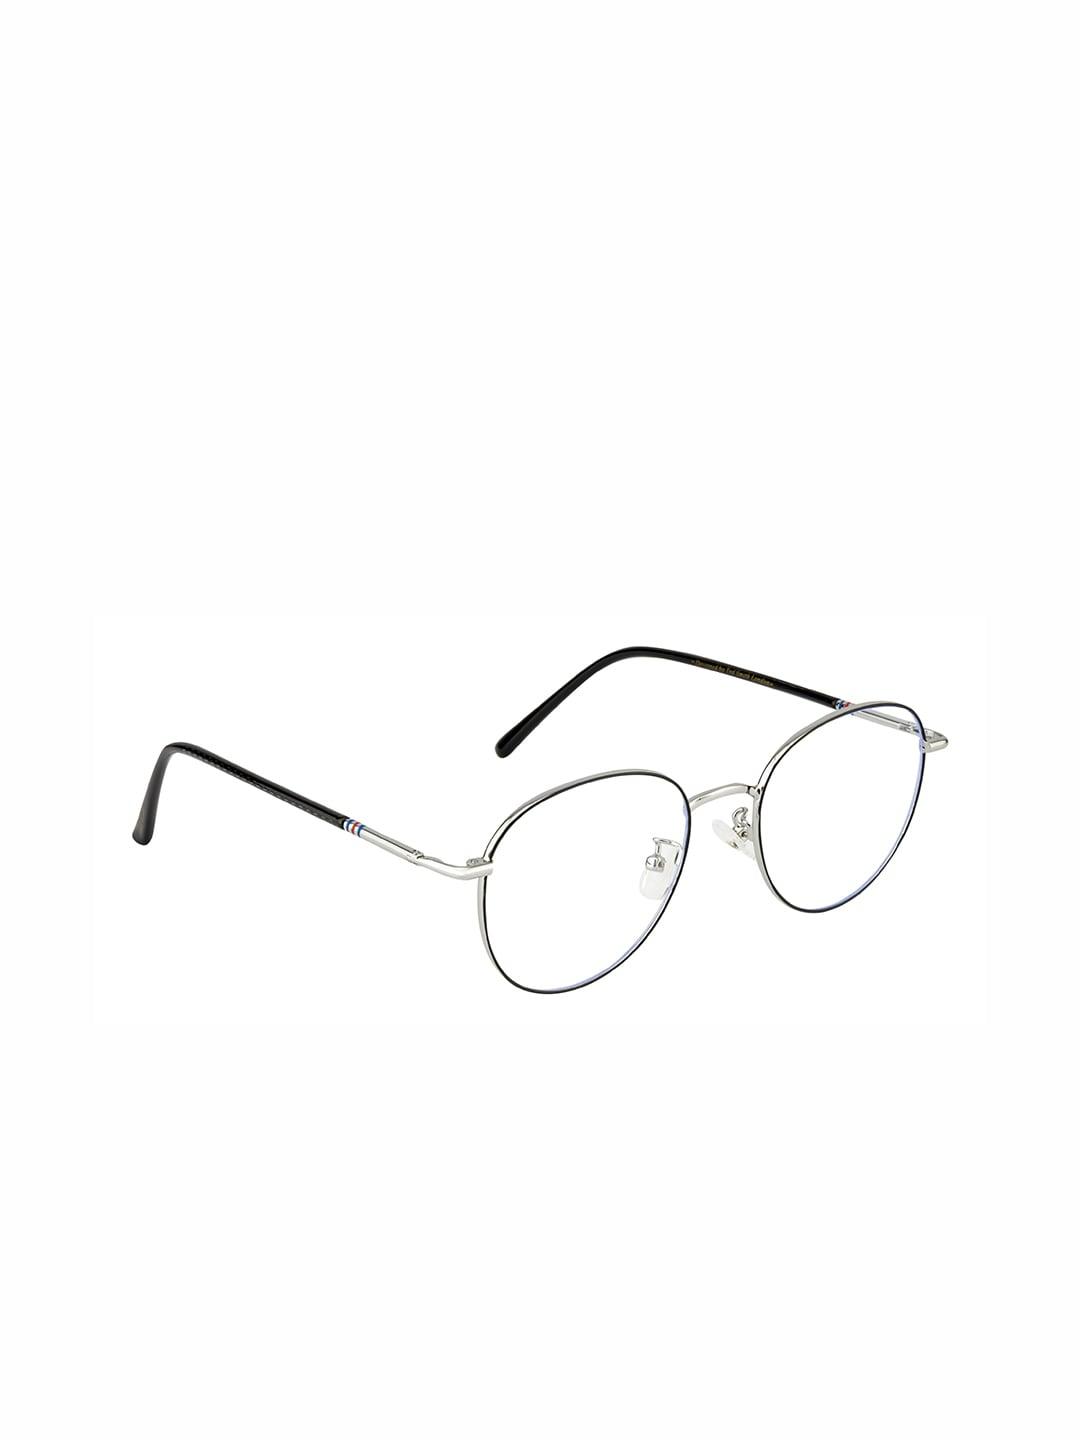 ted smith unisex silver-toned full rim round frames ts-373_blk-sil